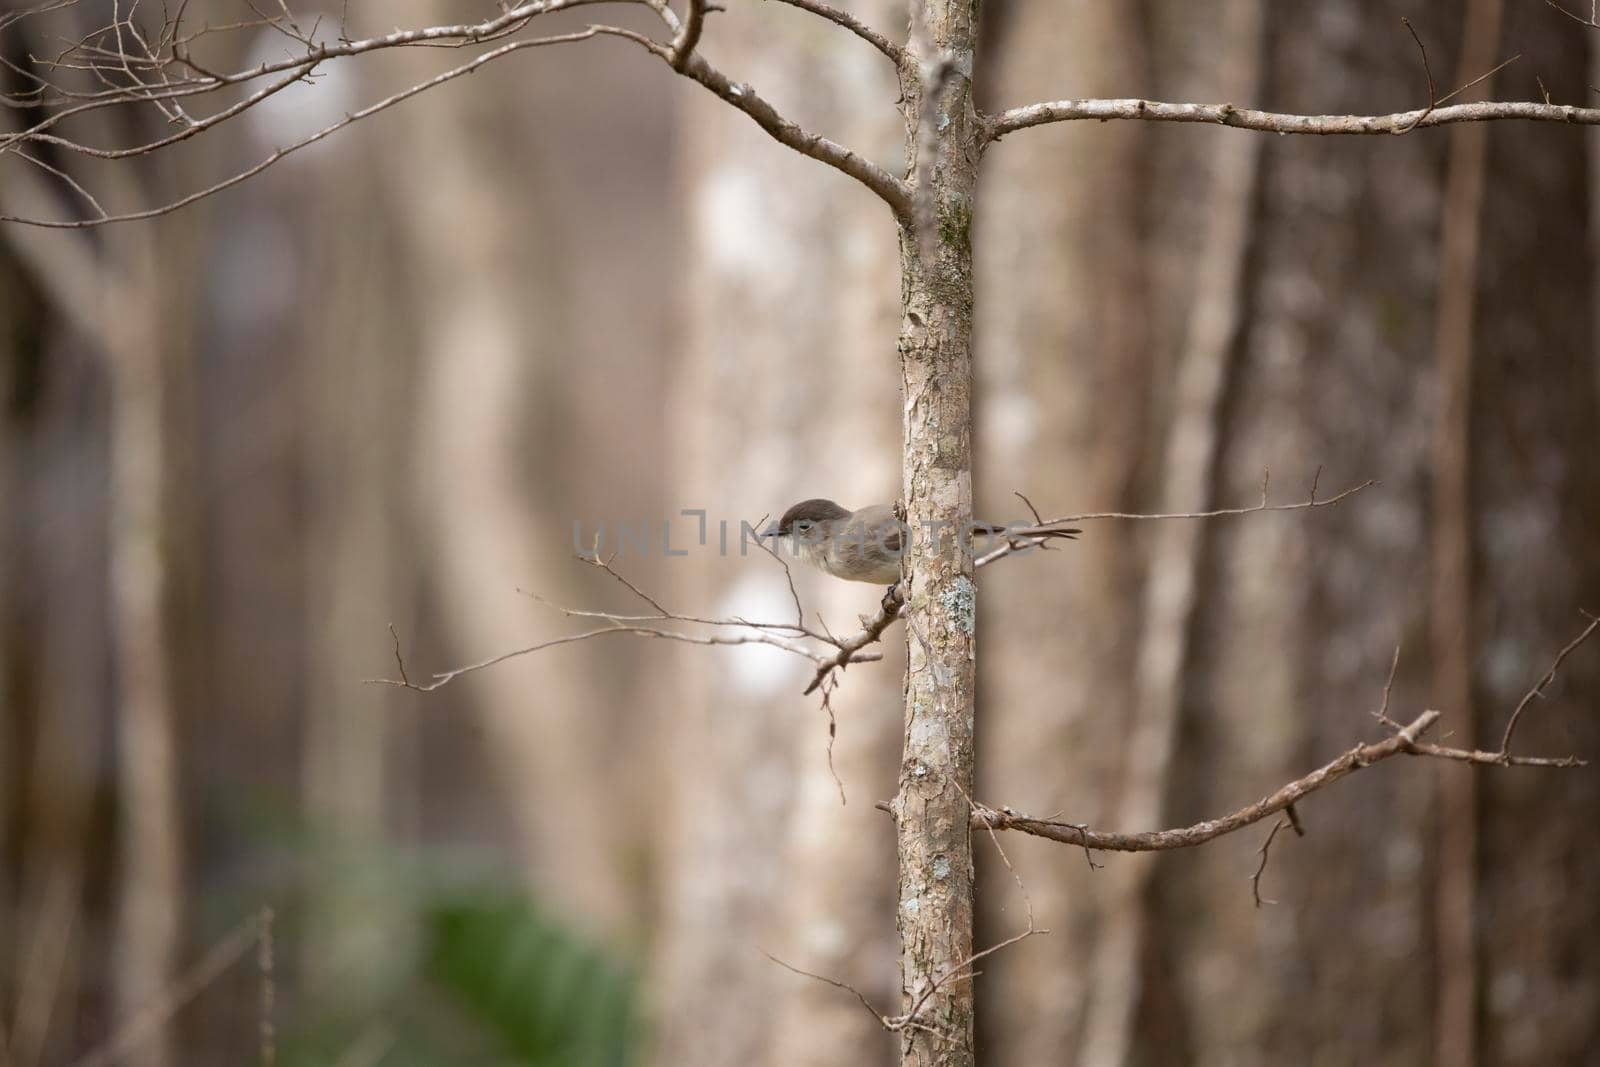 Eastern phoebe (Sayornis phoebe) preparing to take flight from a small, bare branch